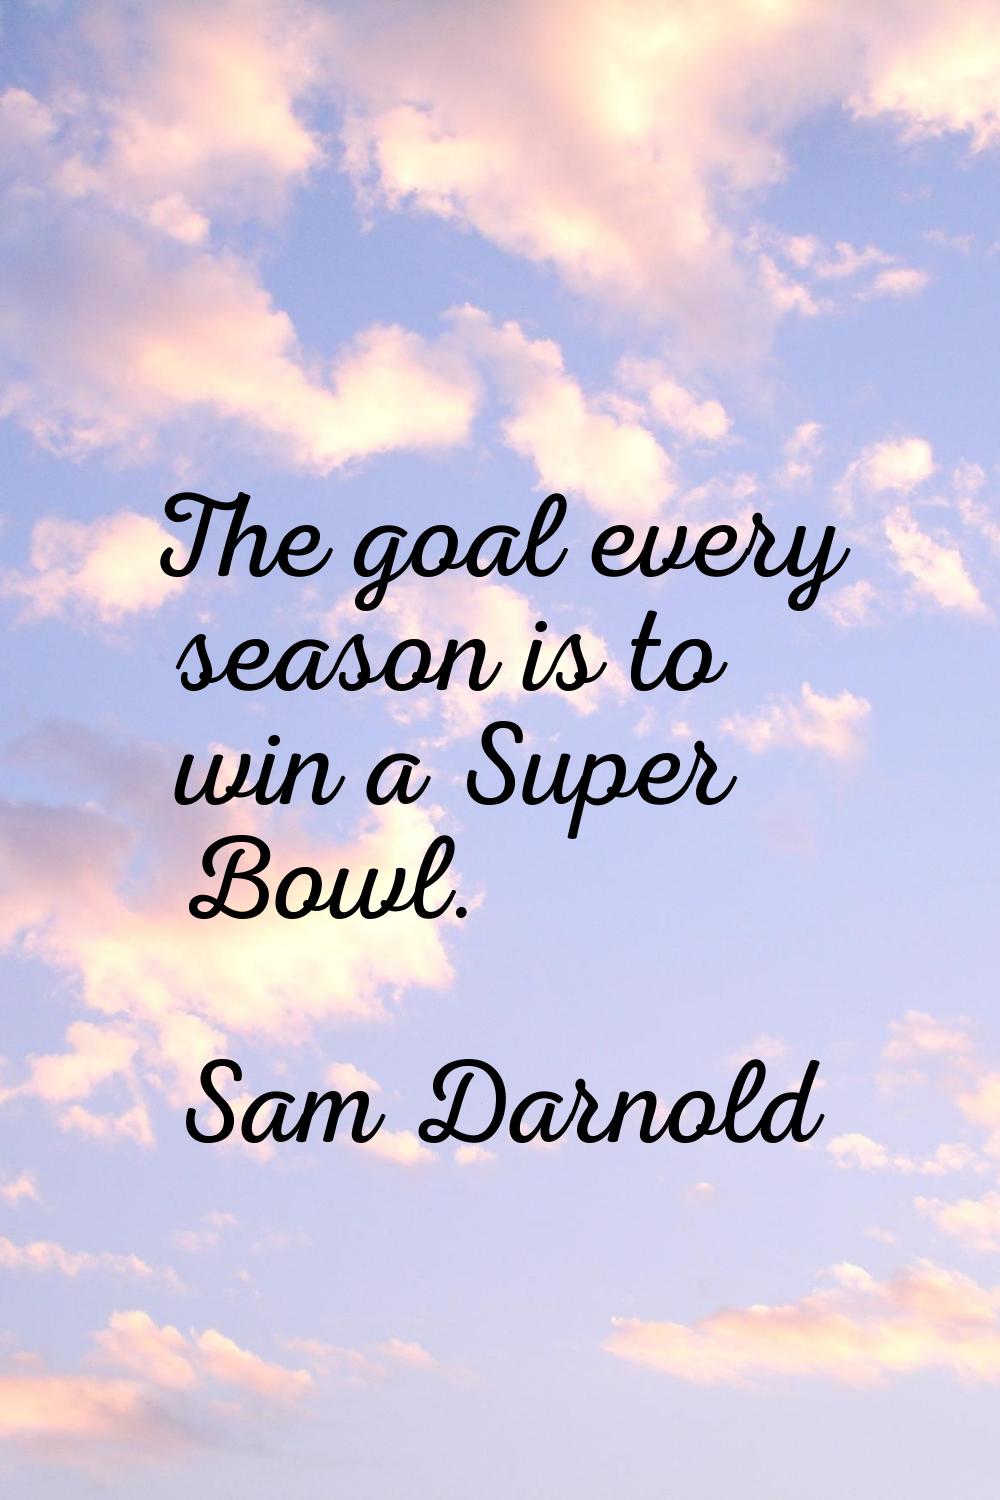 The goal every season is to win a Super Bowl.